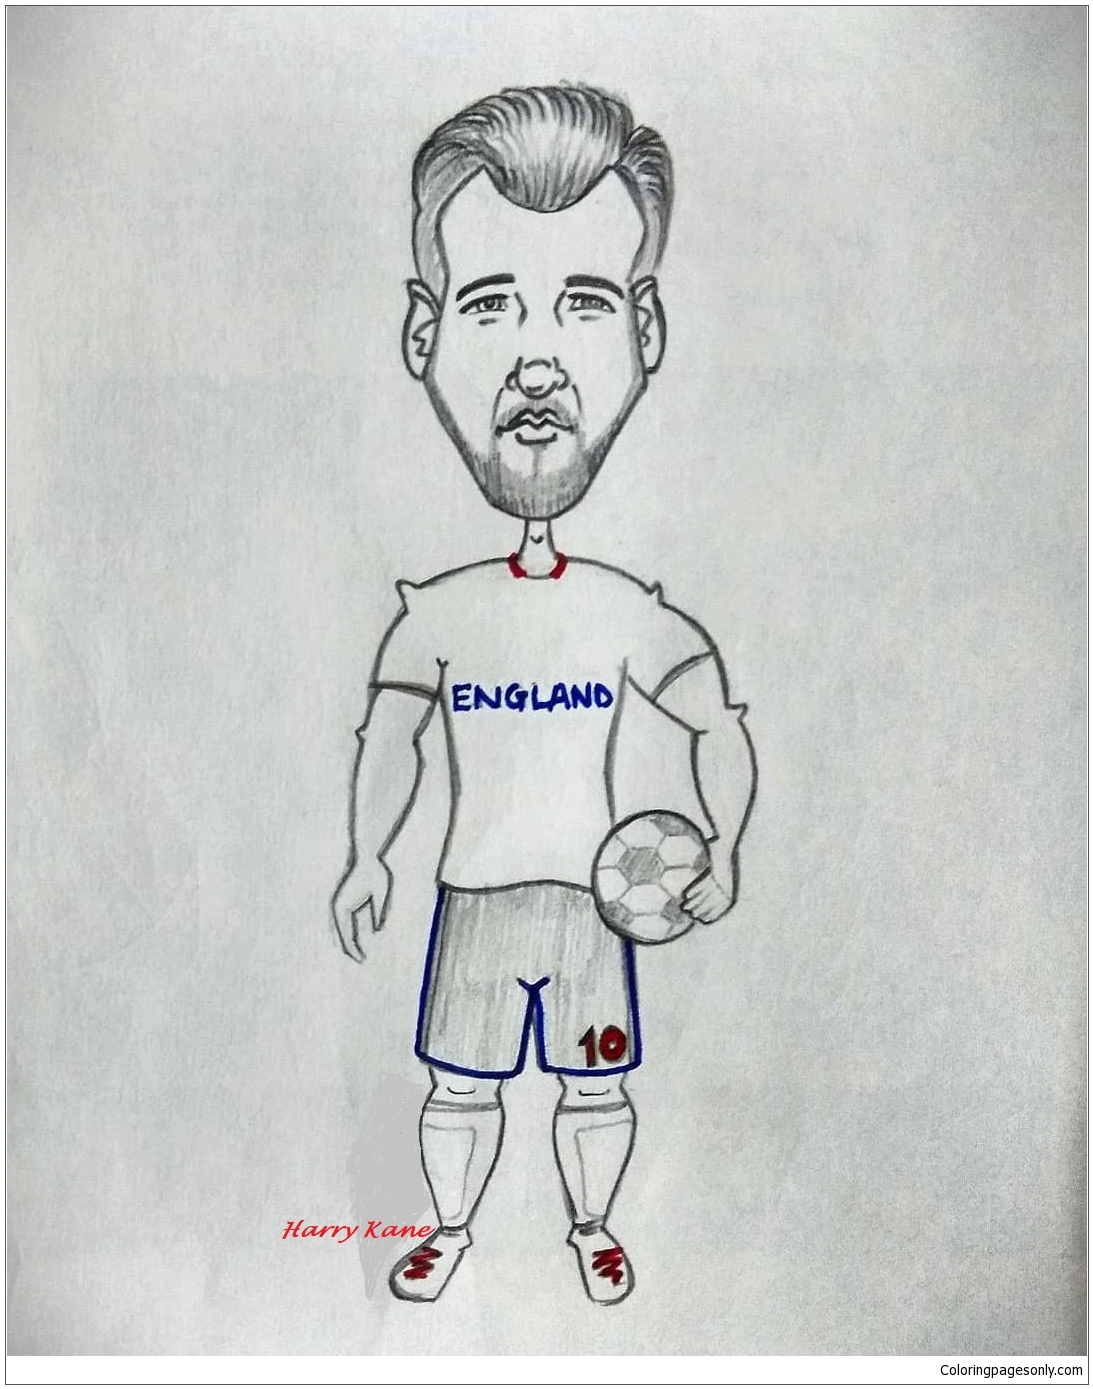 Harry Kane-image 8 Coloring Pages